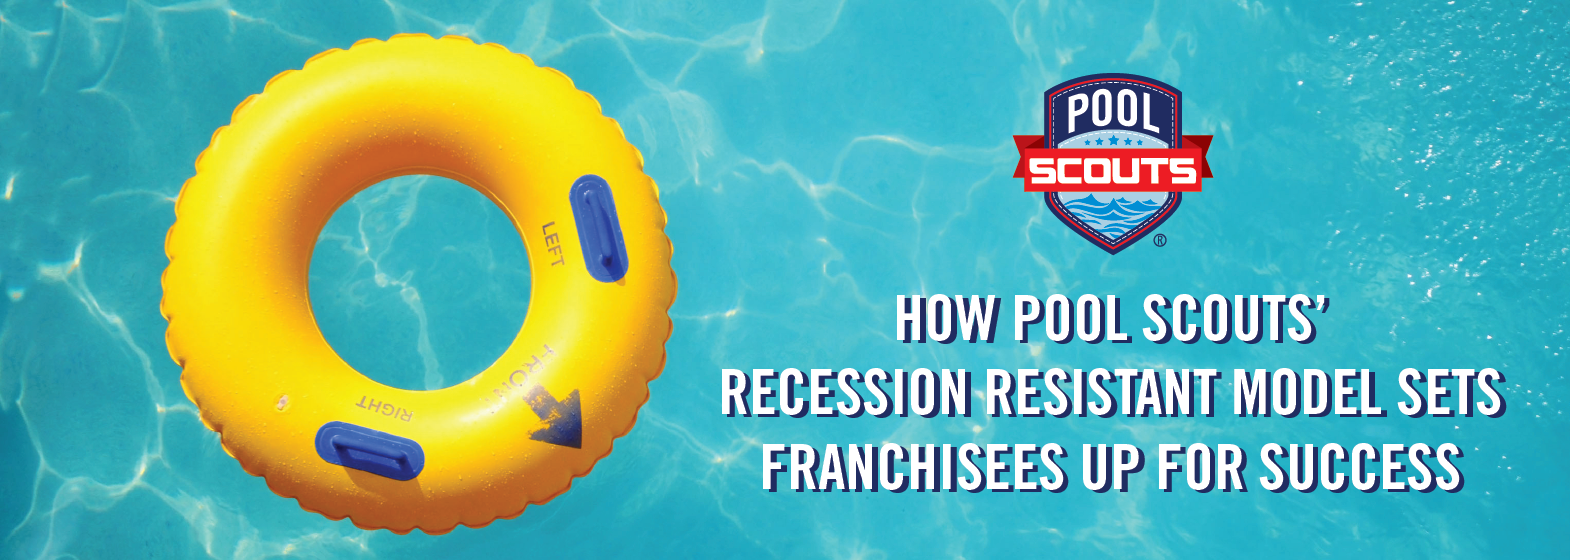 Image of How Pool Scouts’ Recession Resistant Model Sets Franchisees Up For Success